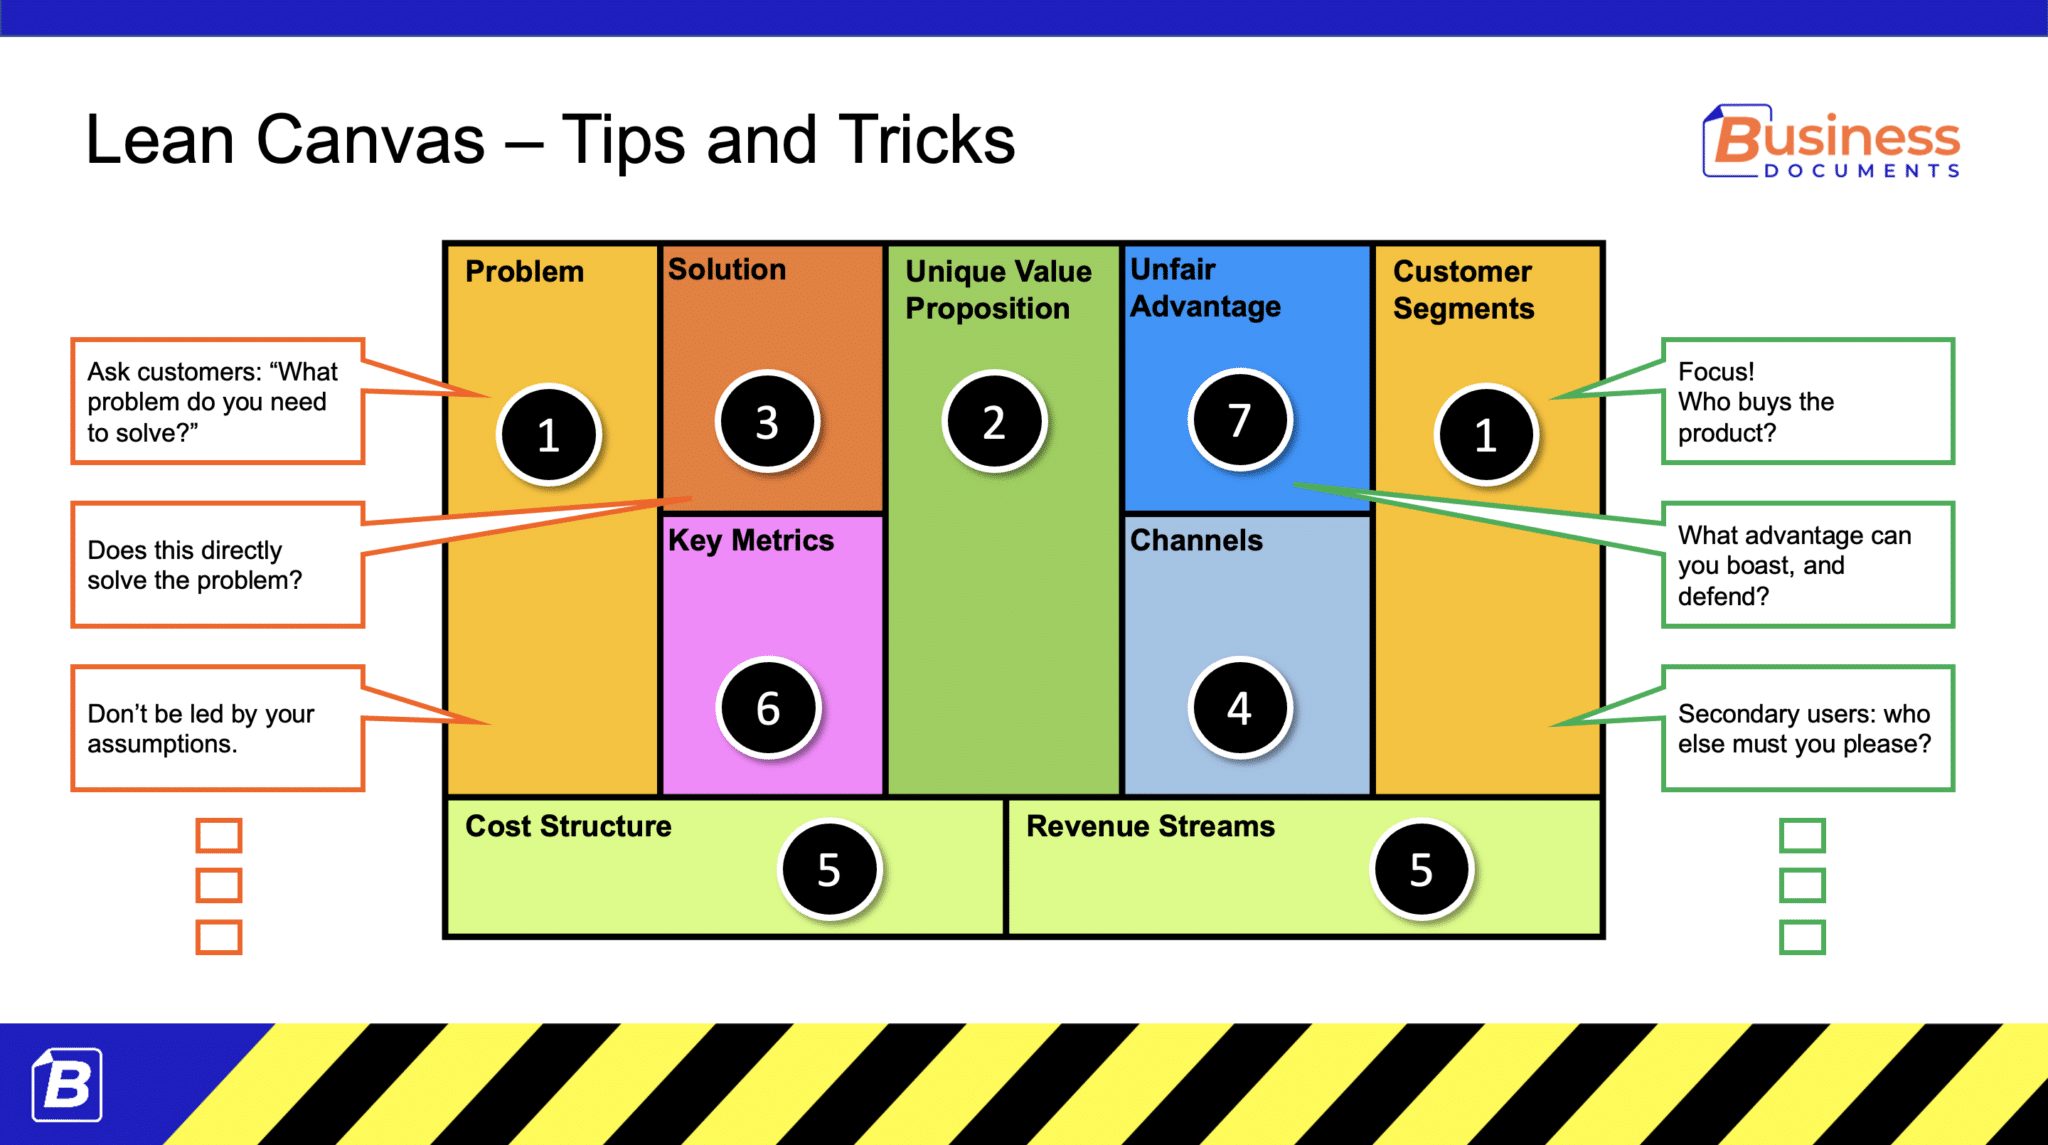 Lean Canvas - Tips and Tricks